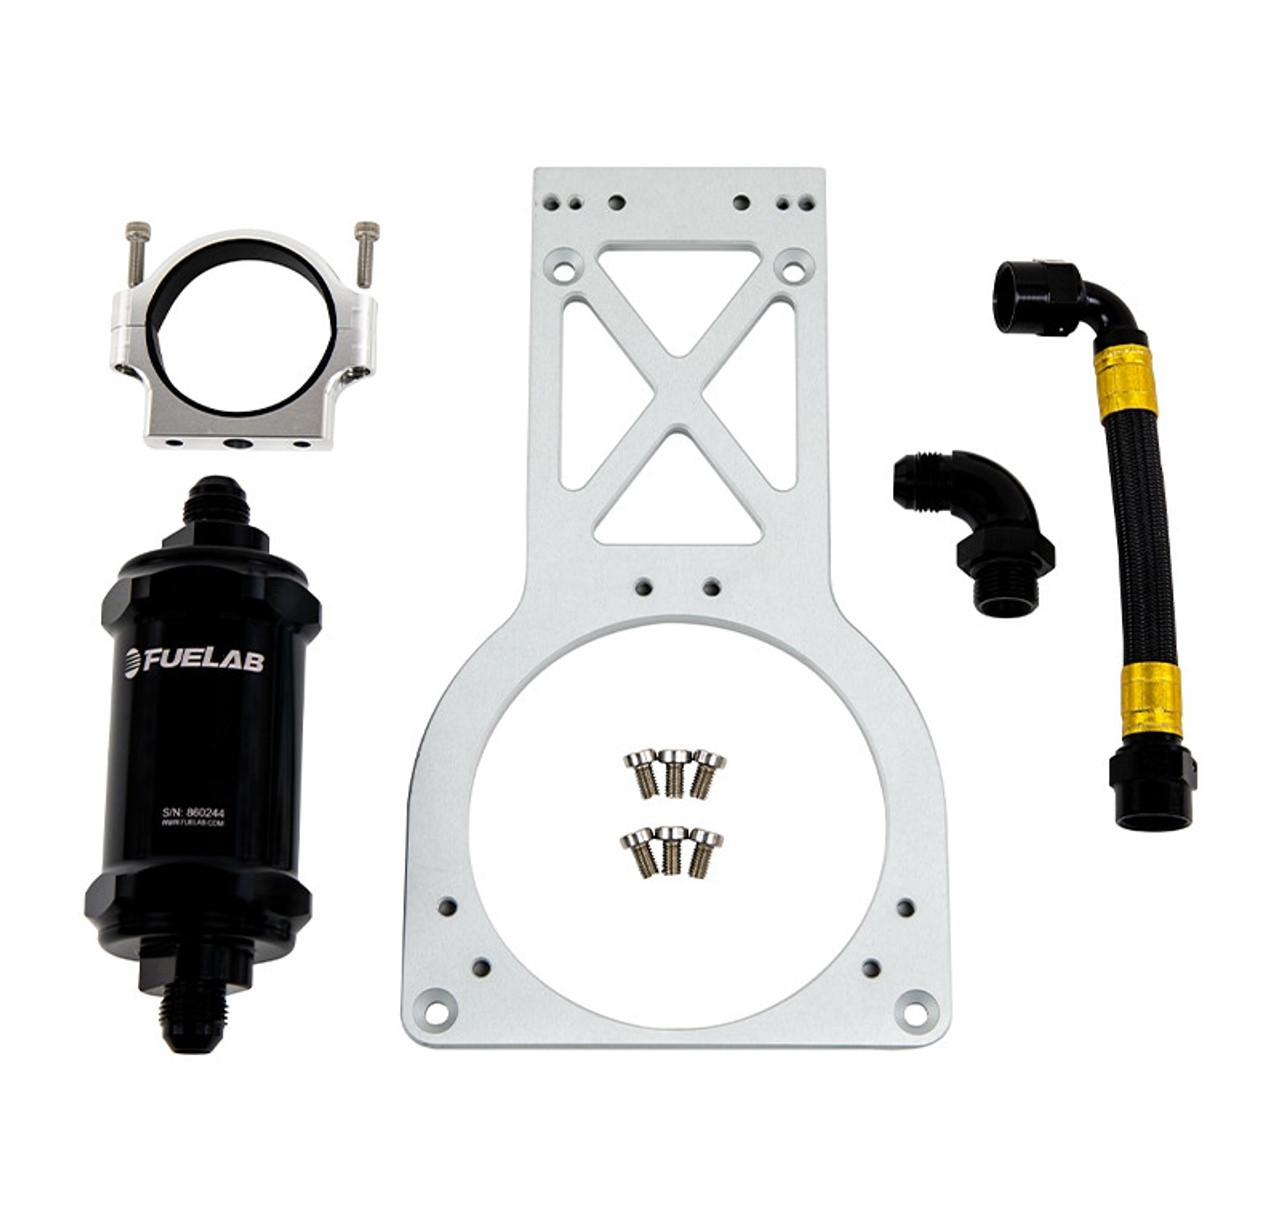 Fuelab 23904 PREMIUM FST UPGRADE ACCESSORY KIT FOR 290MM TALL SYSTEM